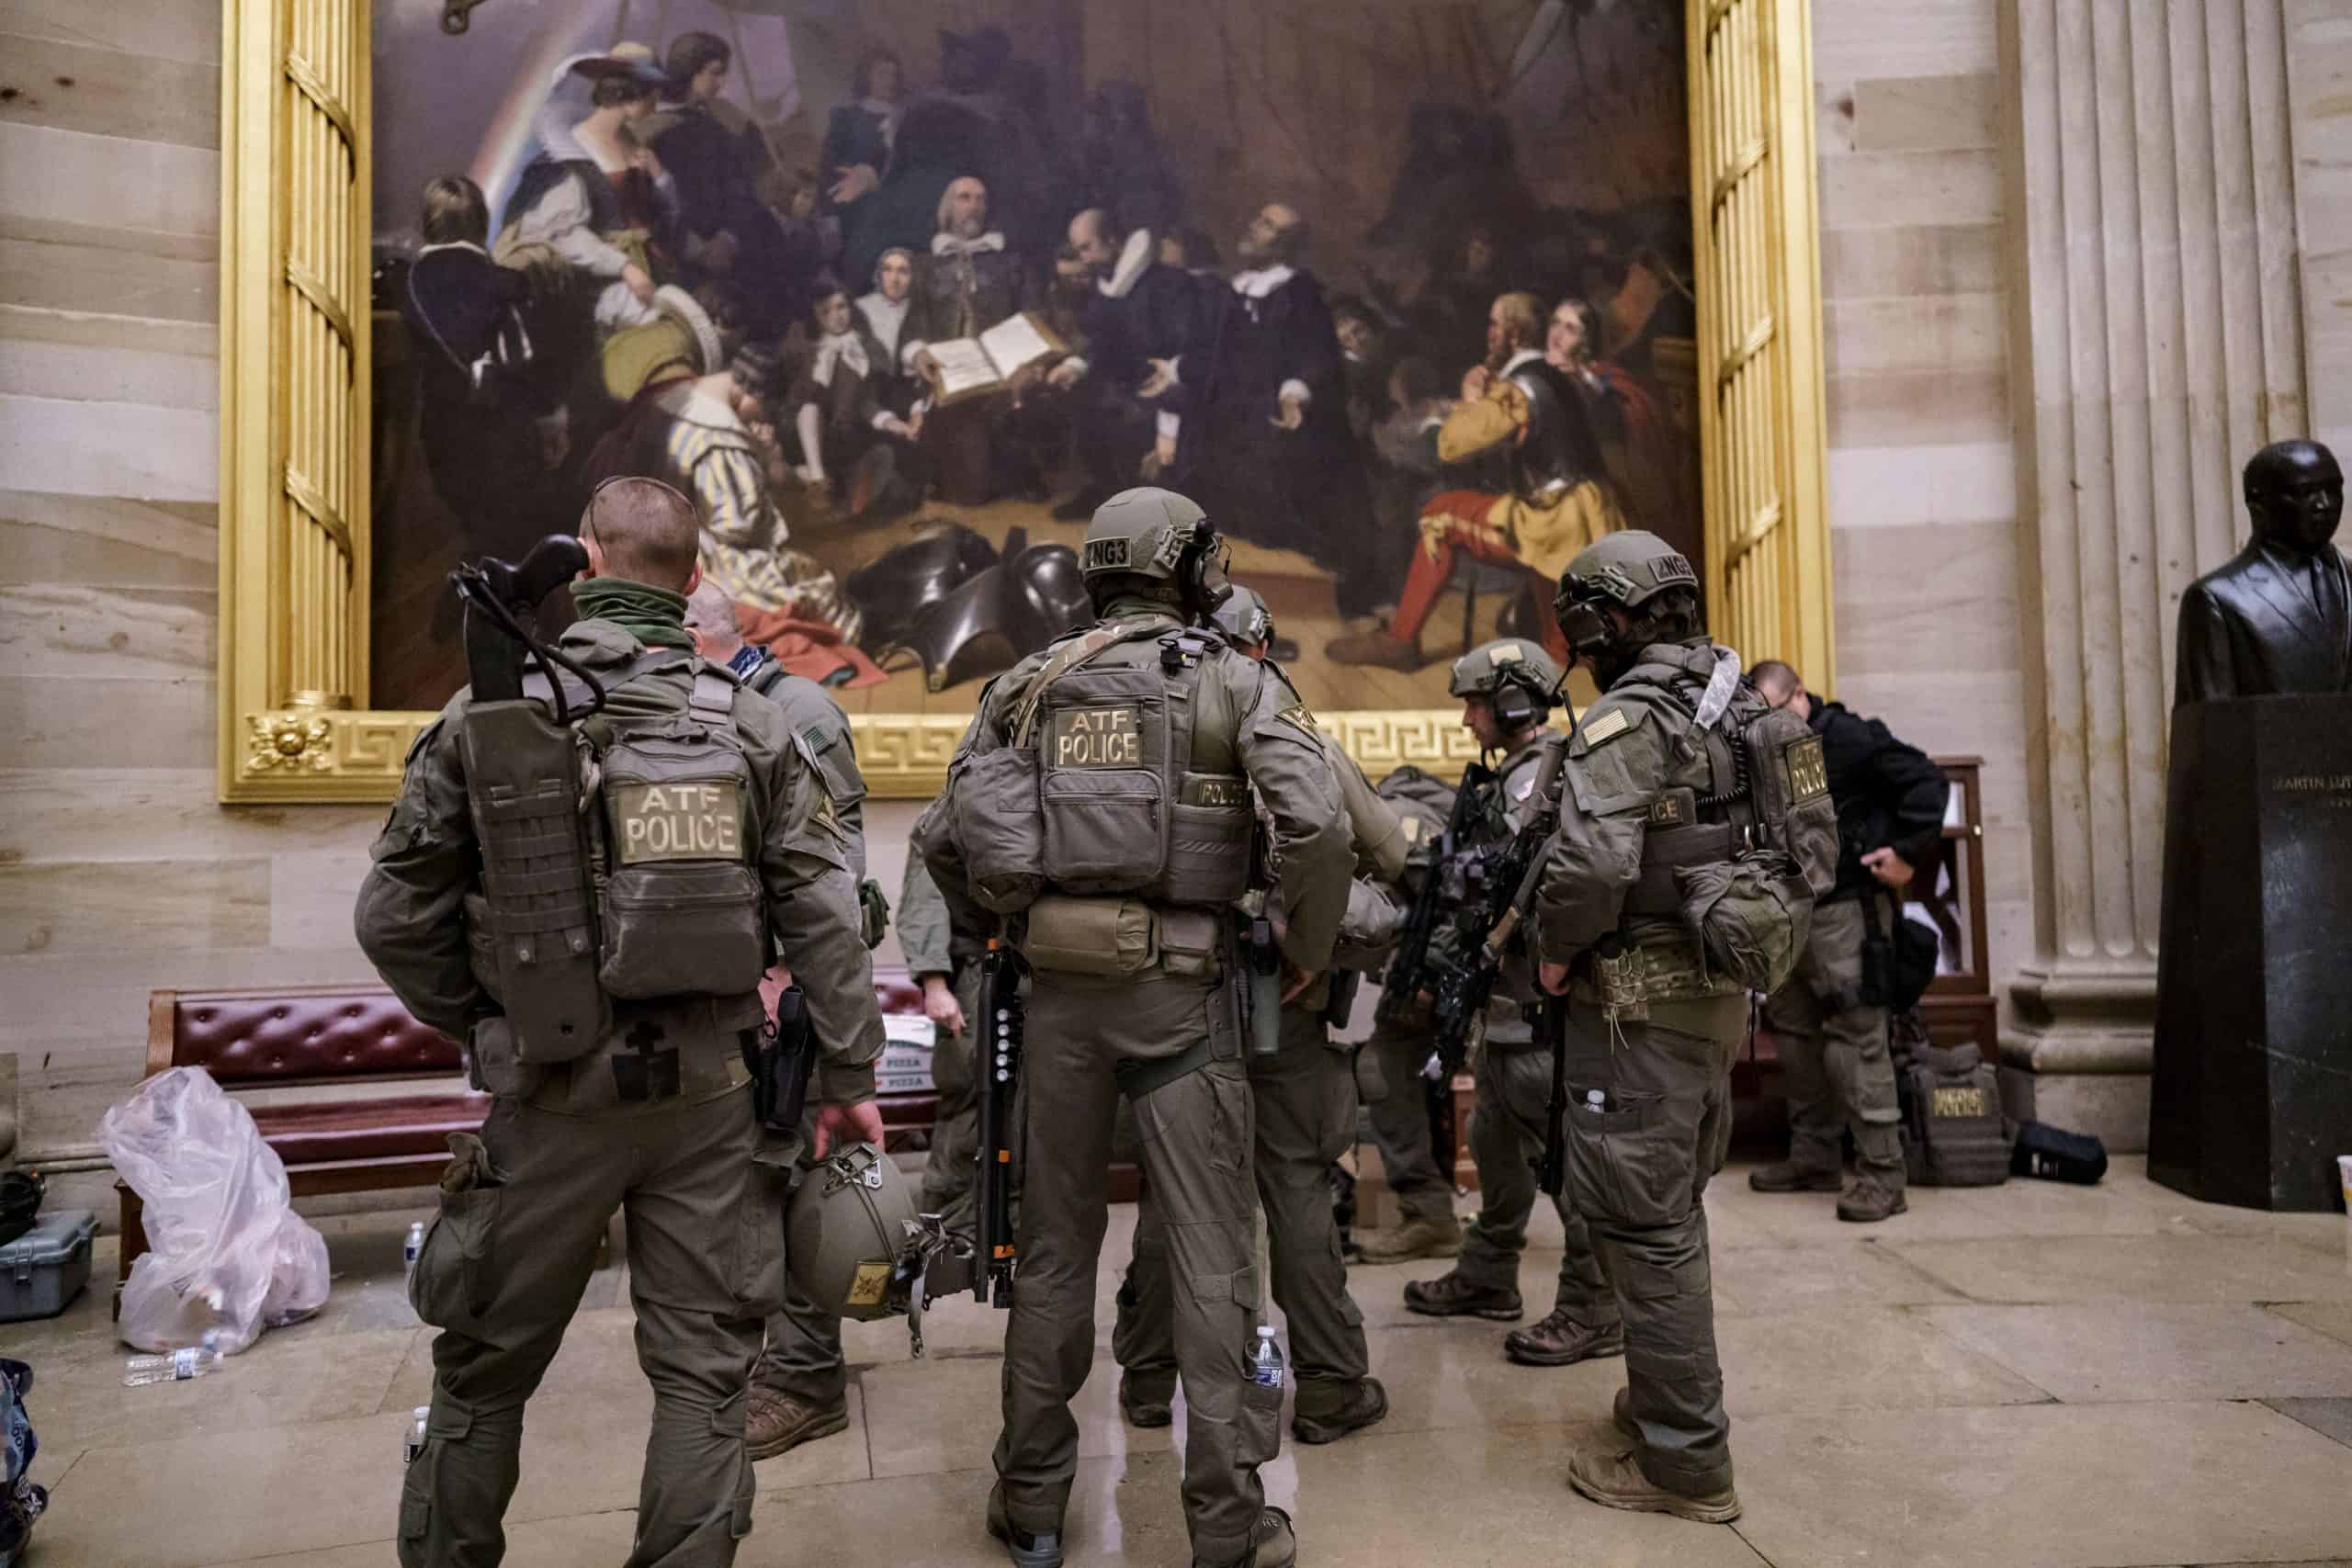 In pictures: Shocking images from the siege on the US Capitol